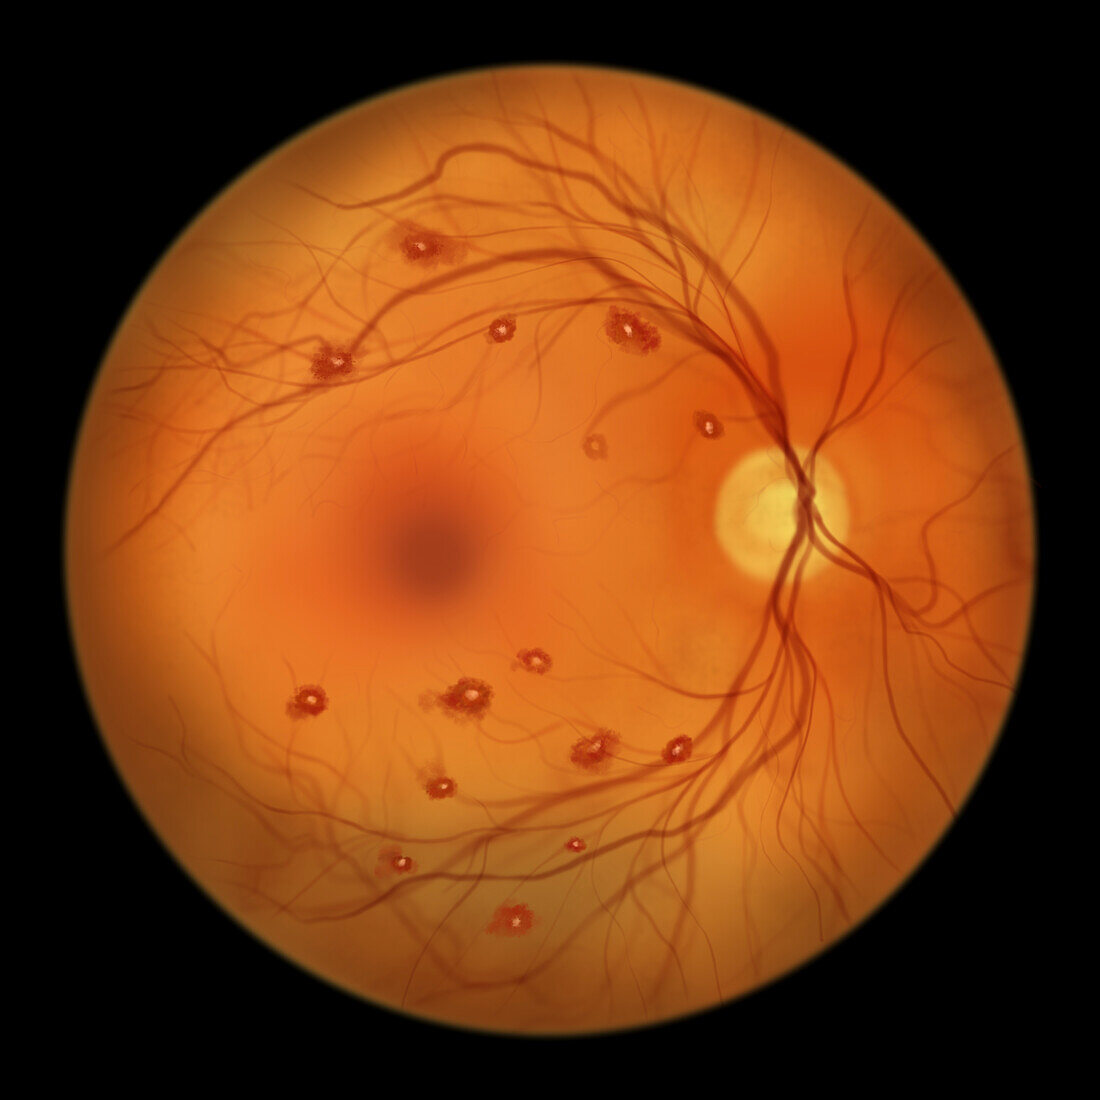 Roth spots in the retina, illustration